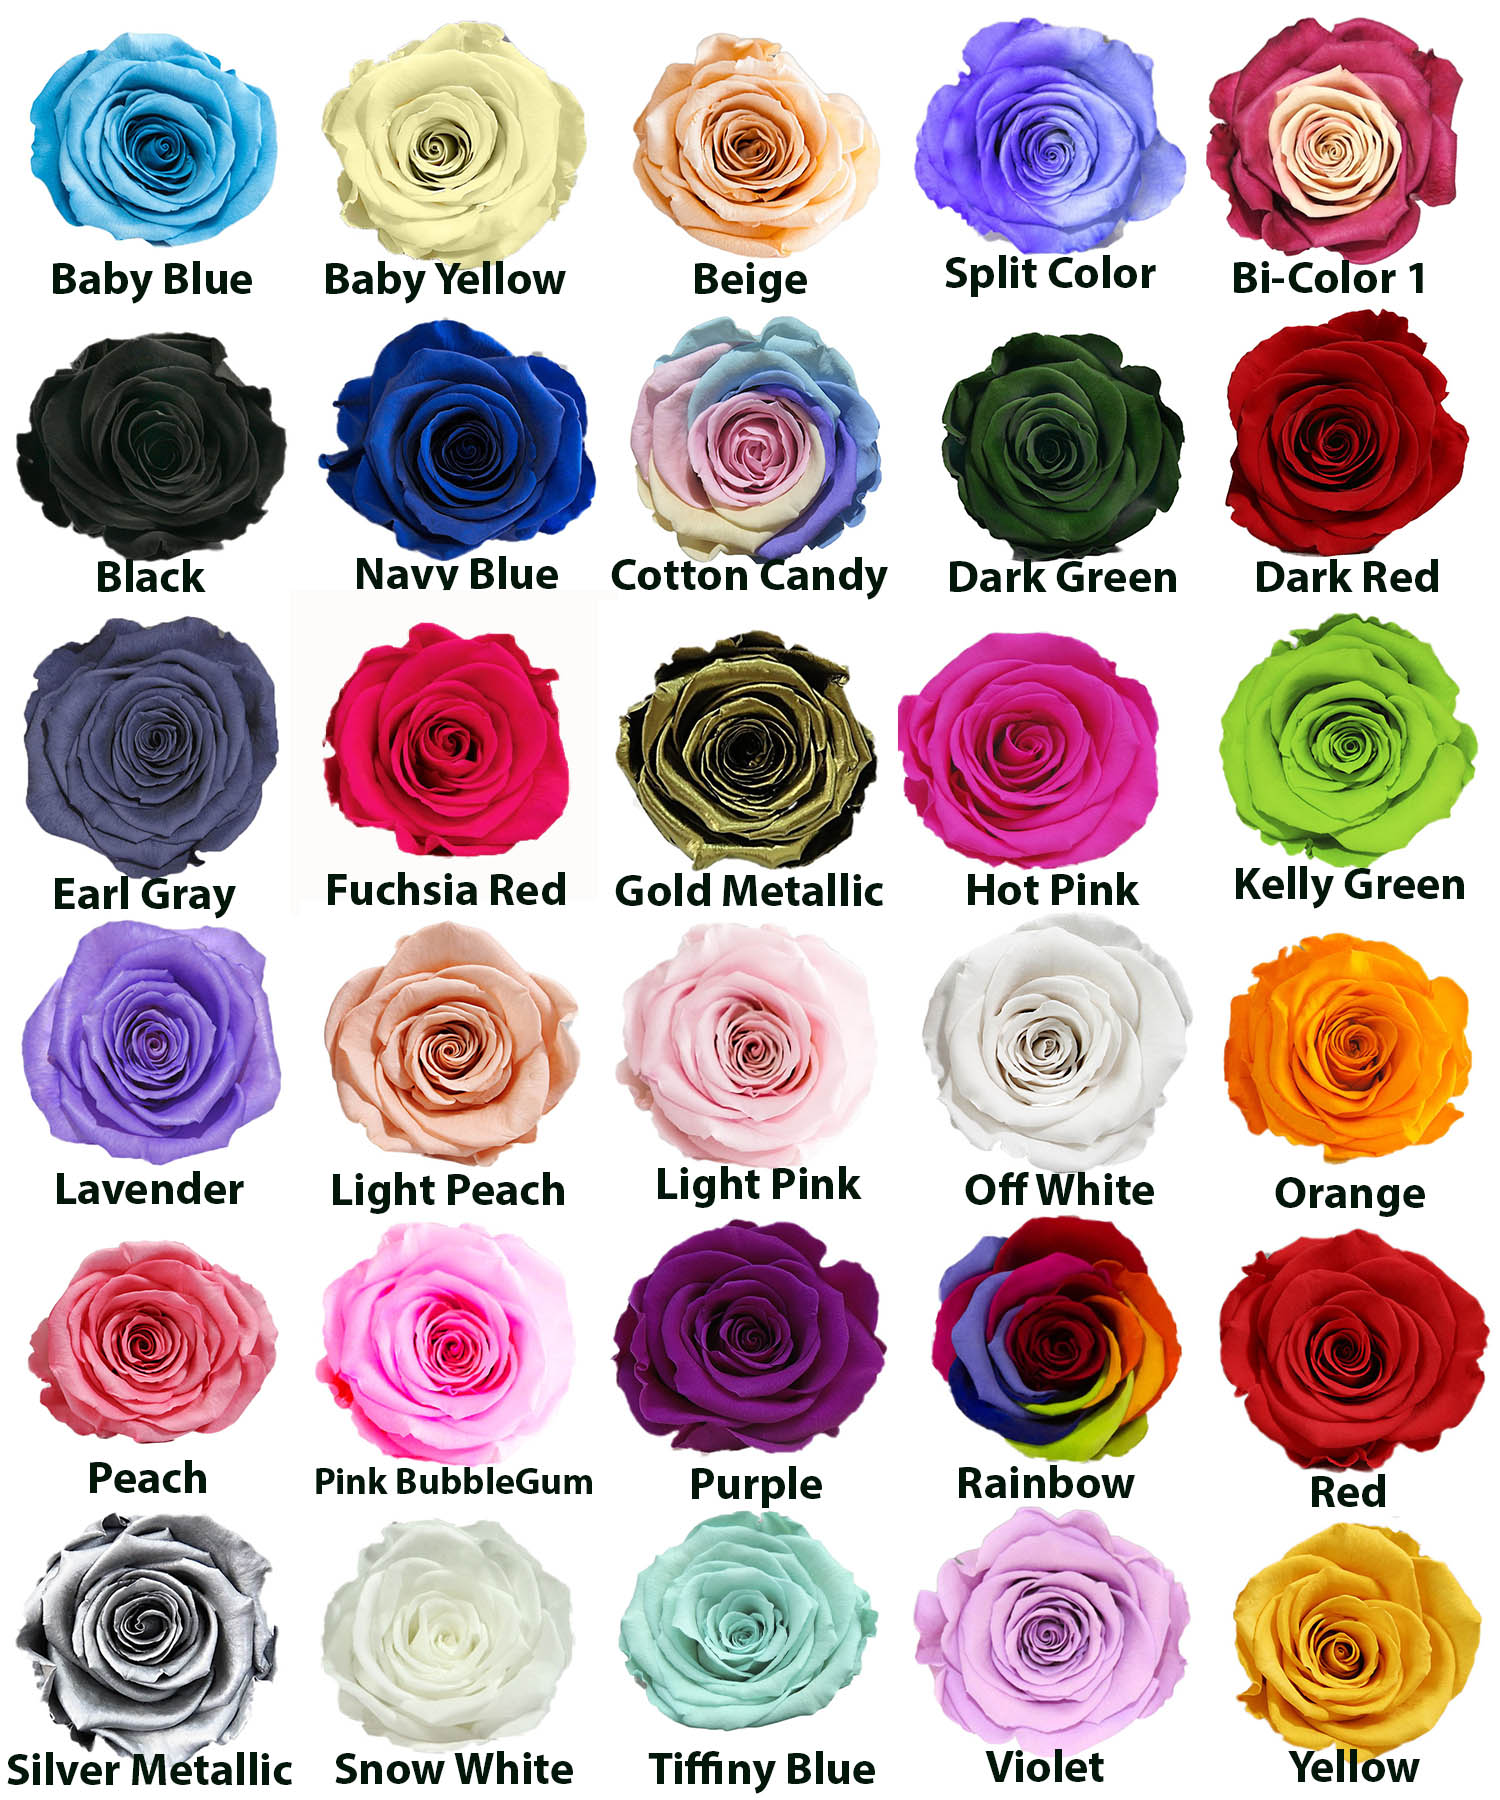 Rose Types And Colors